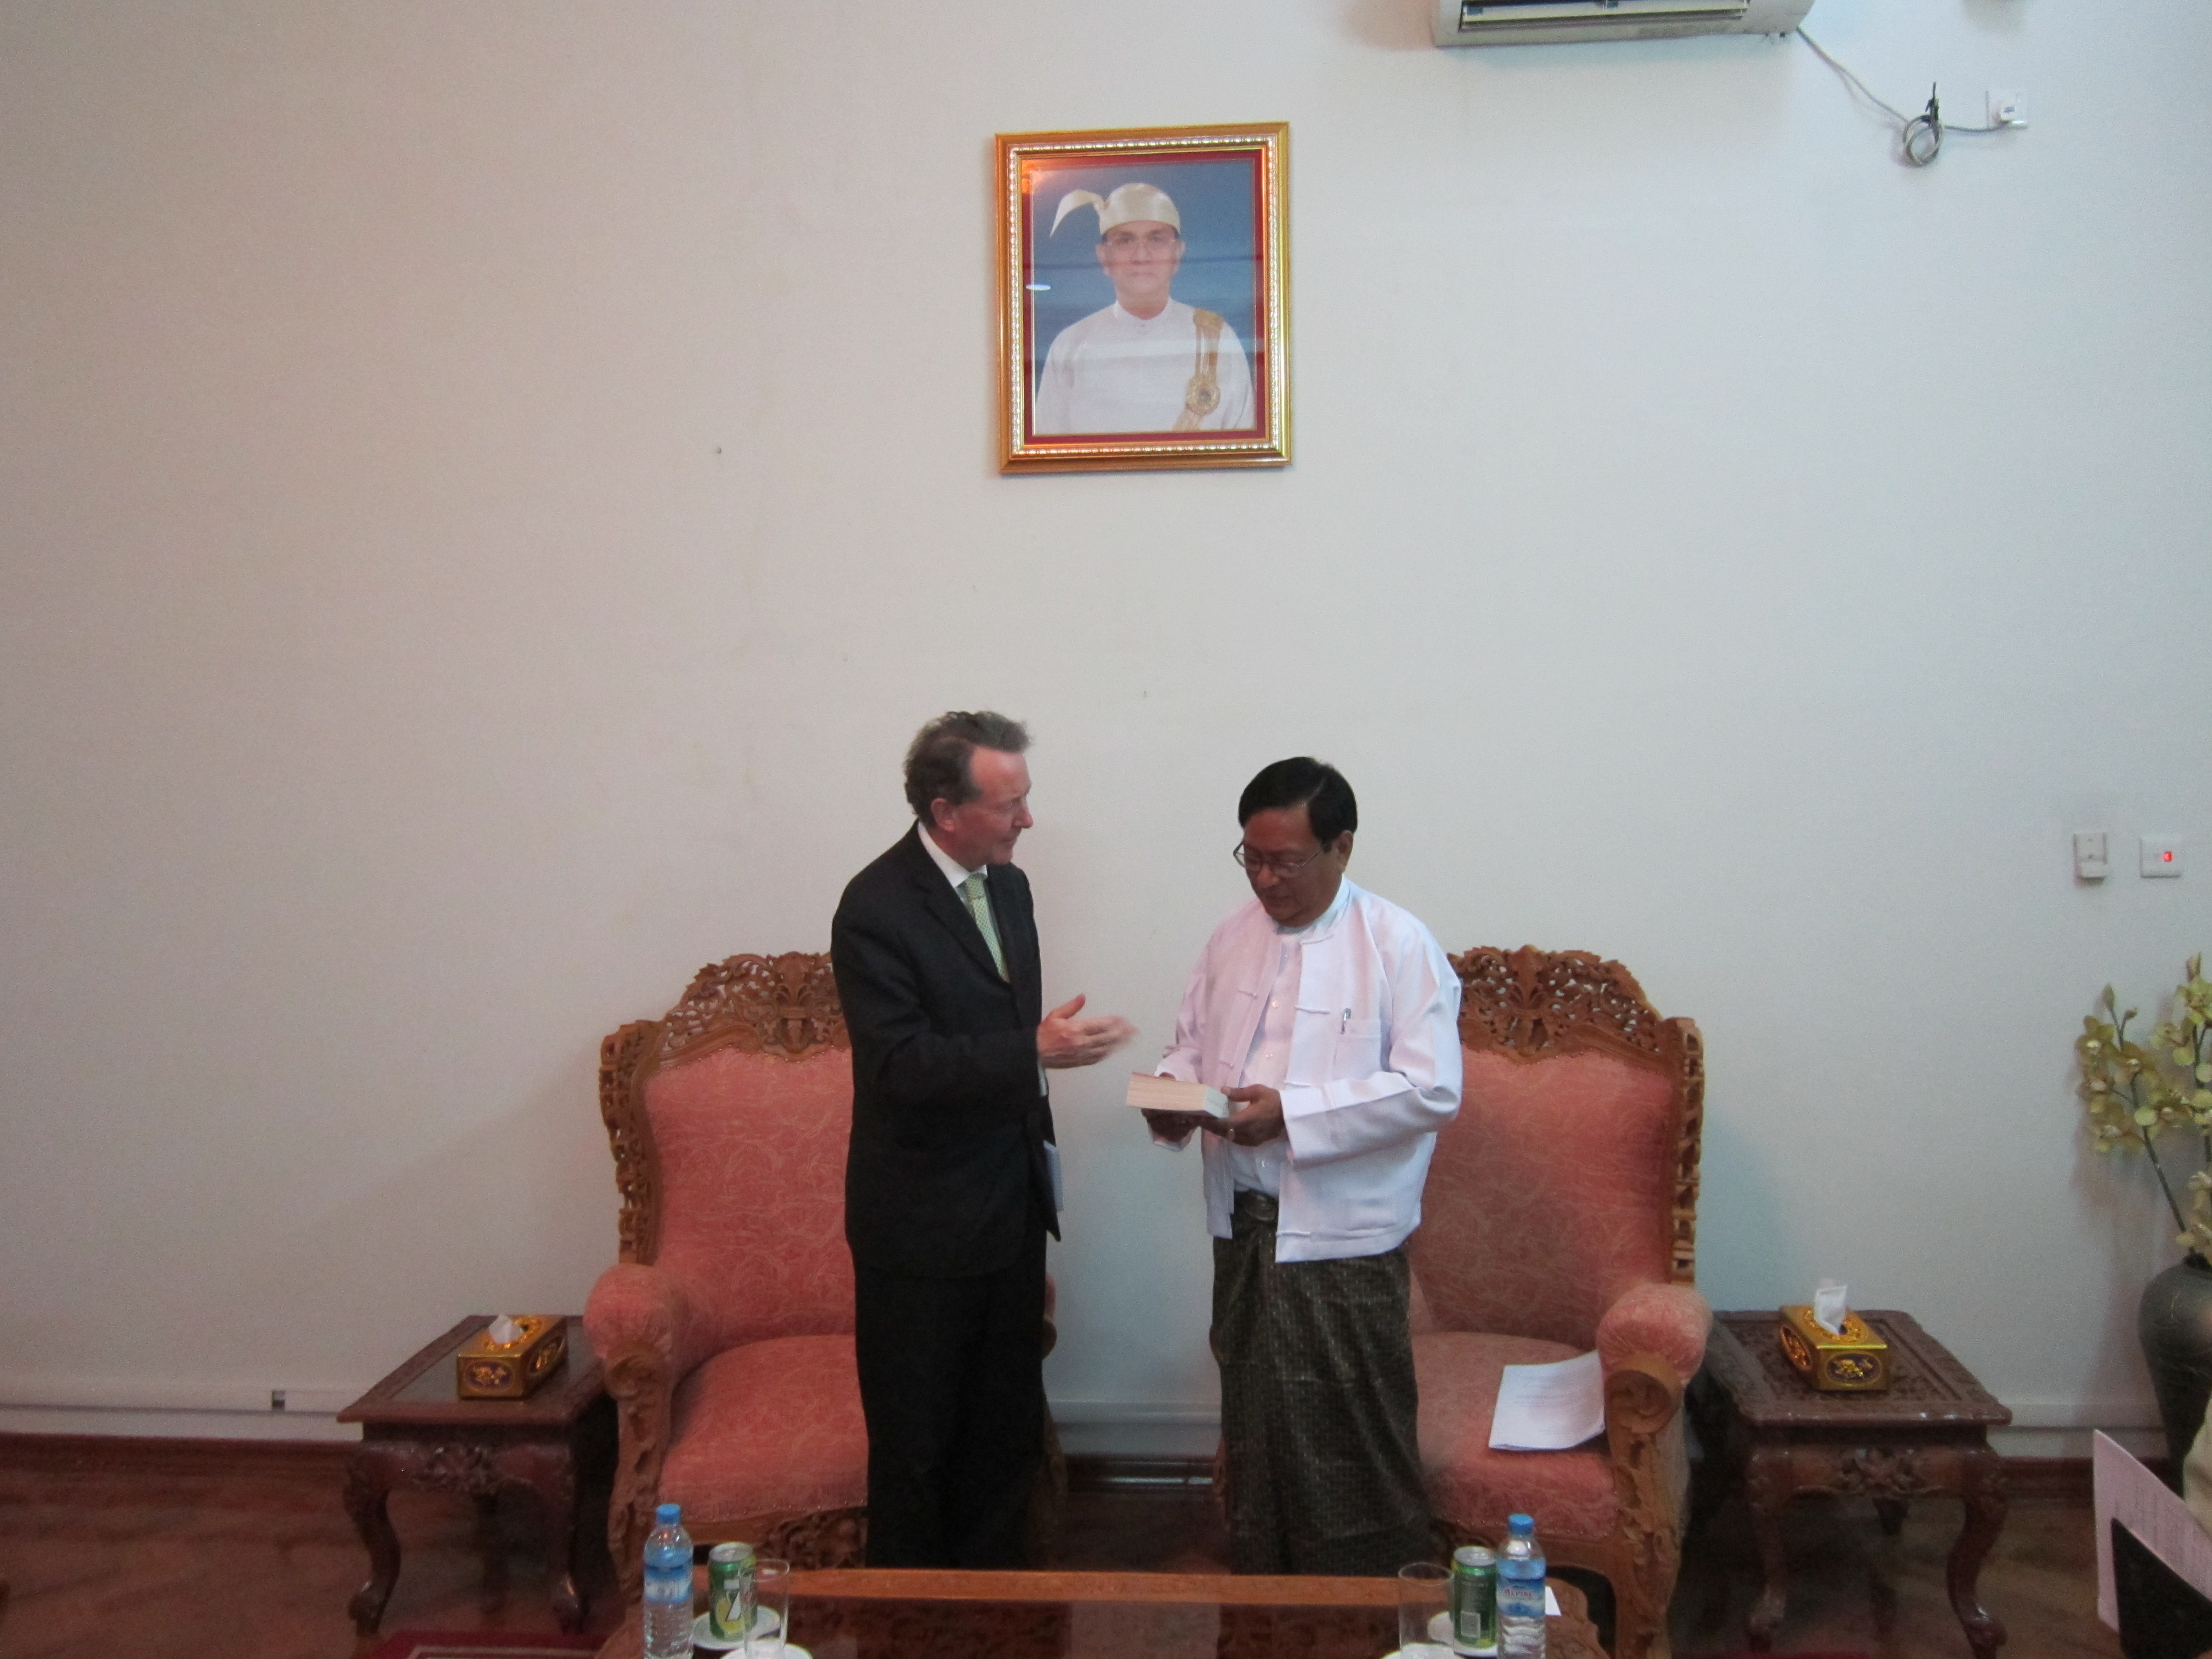 Meeting with Dr.Myo Myint one of Burma's education ministers.